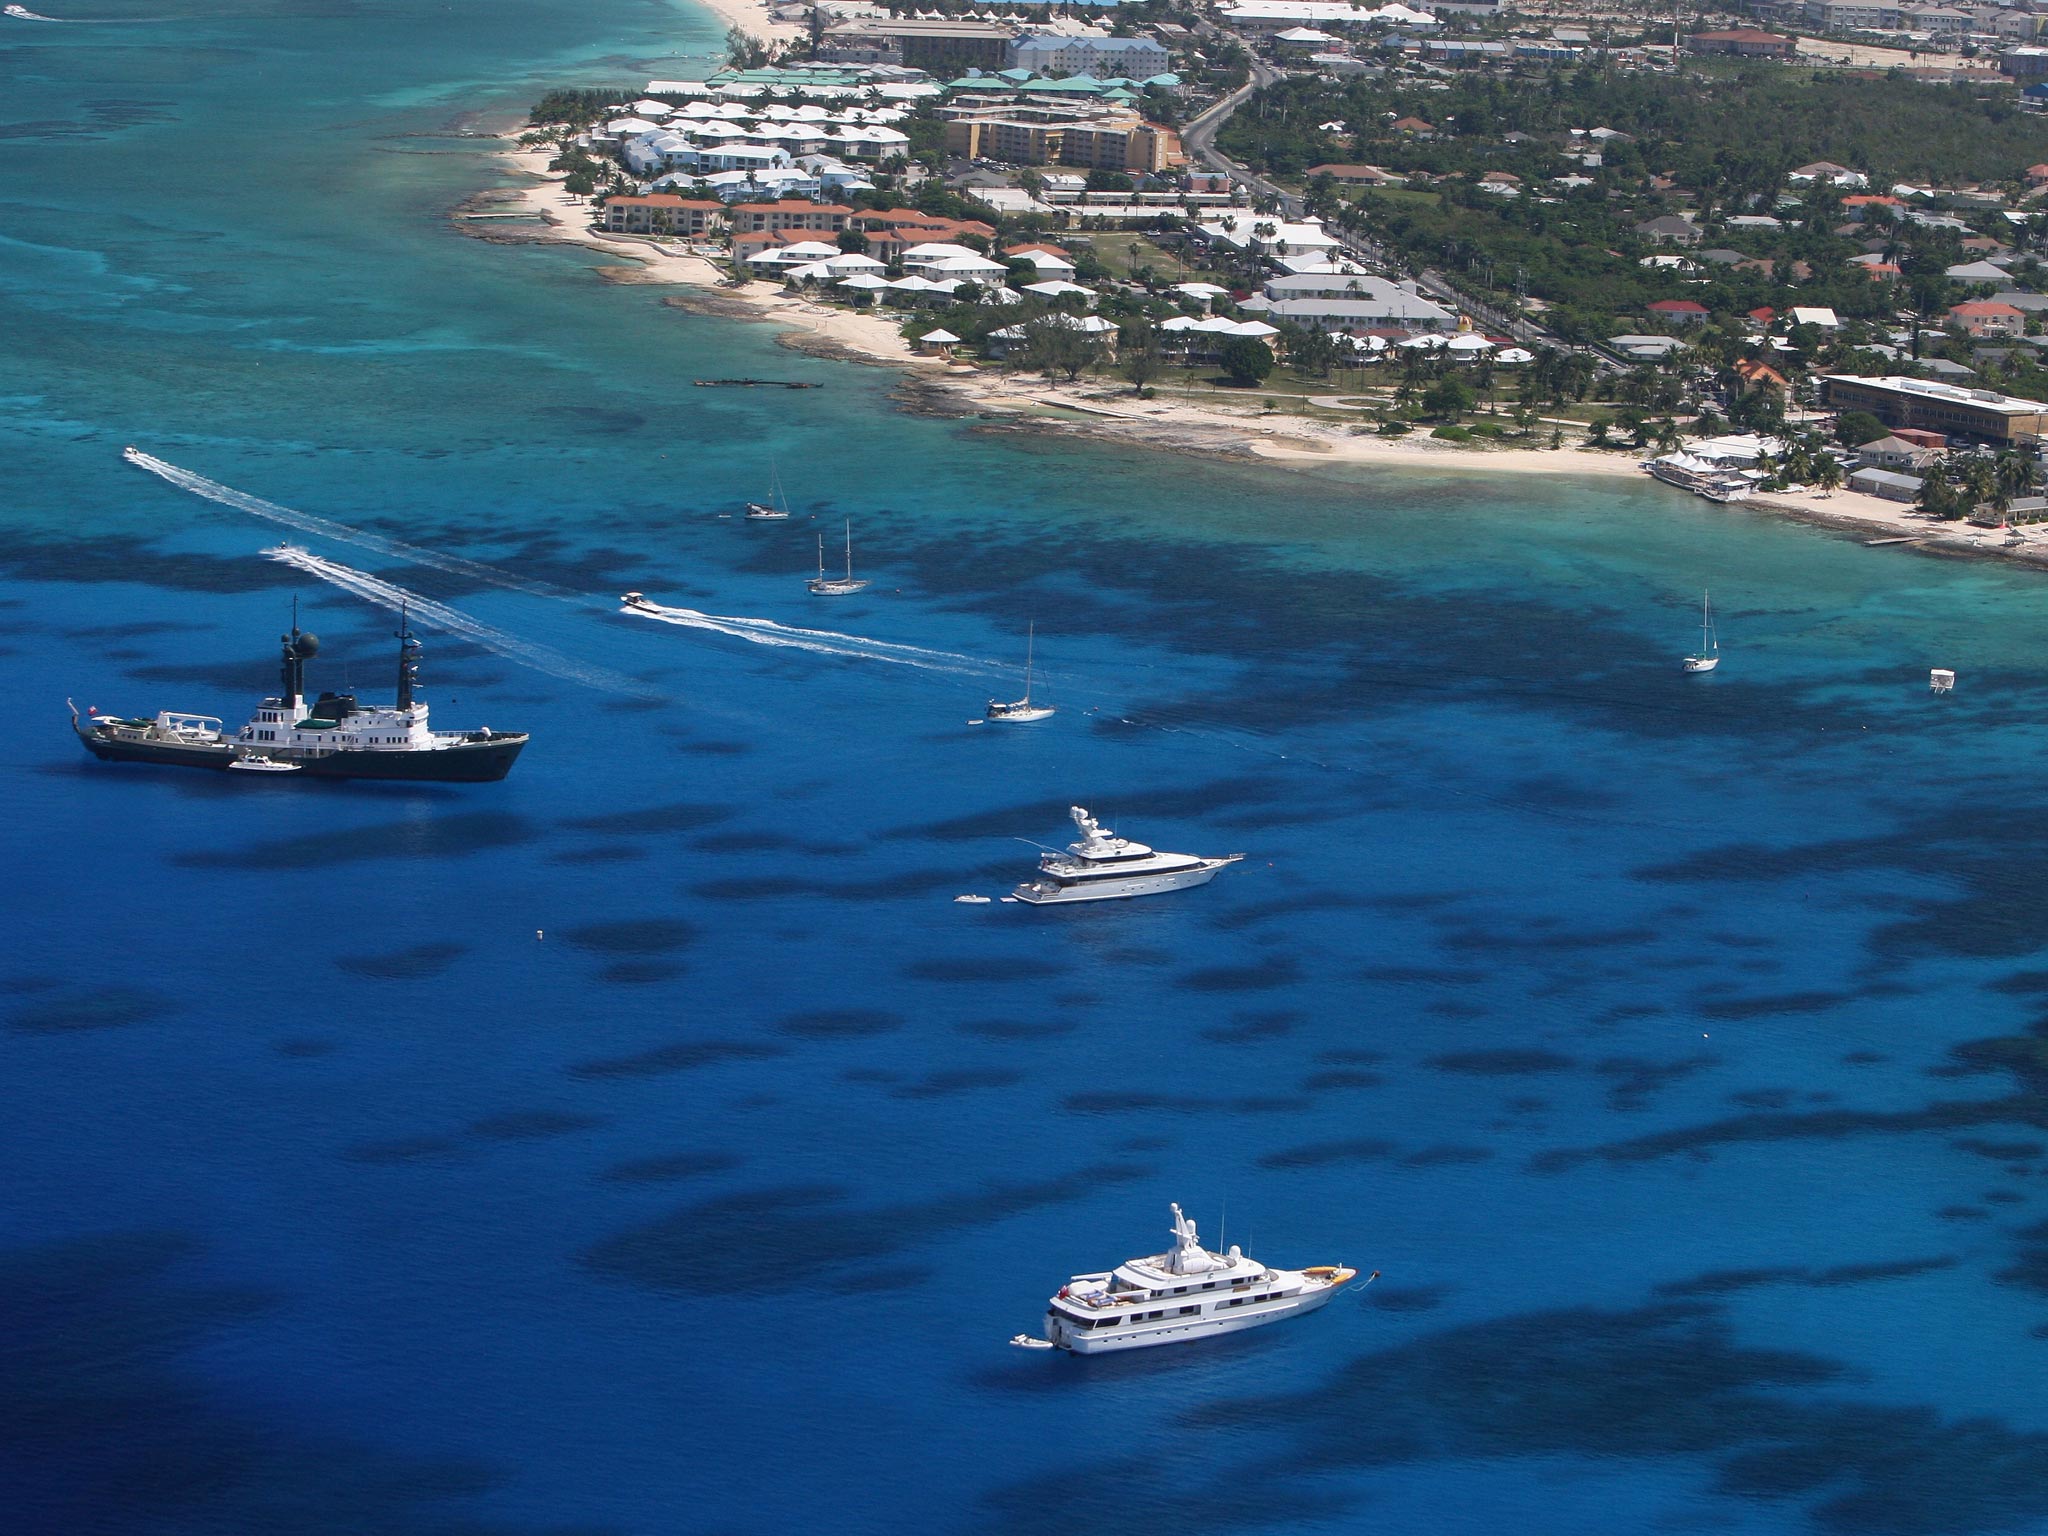 The Cayman Islands is one the UK’s Overseas Territories which have pledged to boost transparency